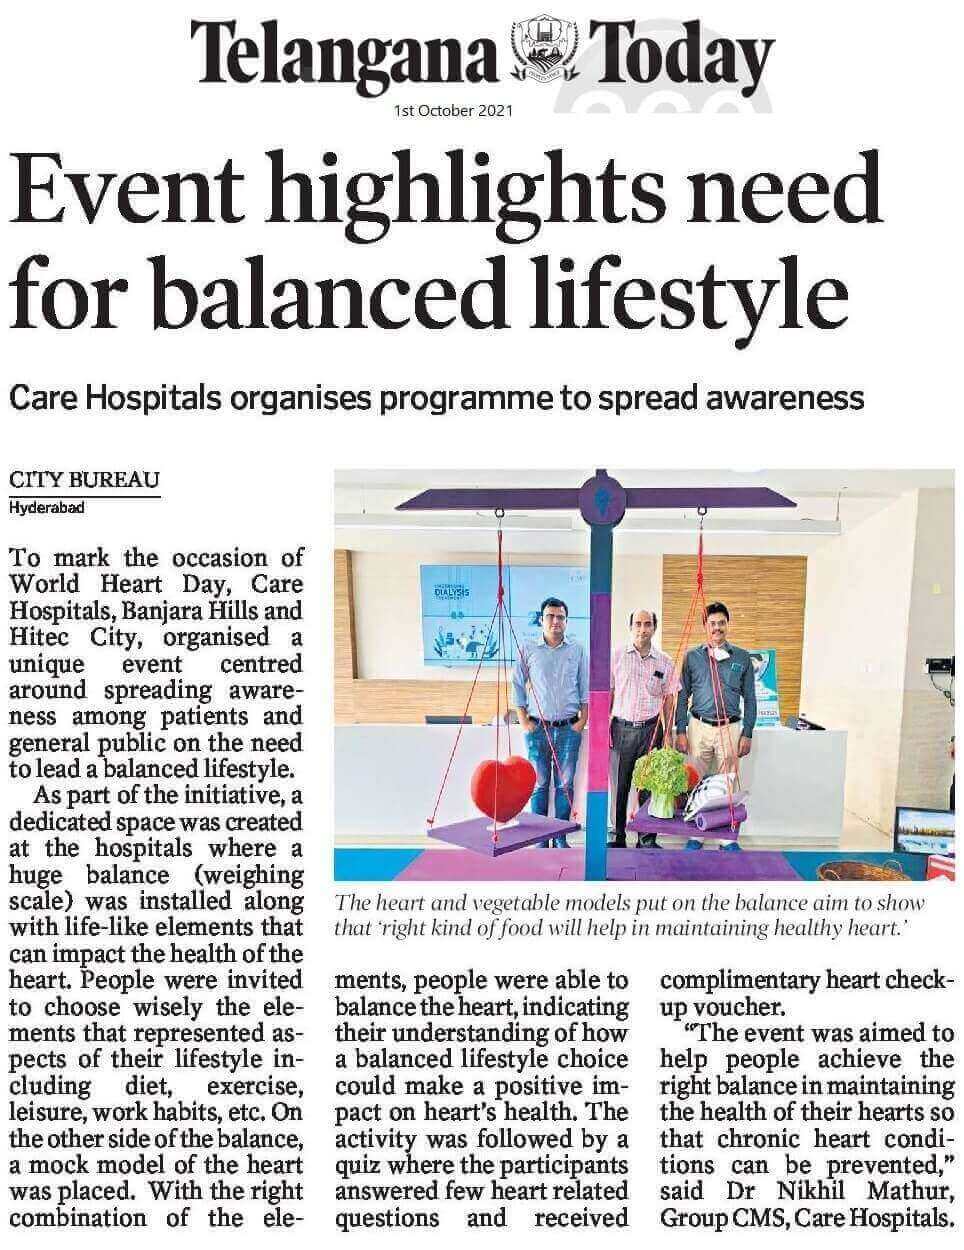 CARE Hospitals organized Balanced Lifestyle on the Occasion of World Heart Day